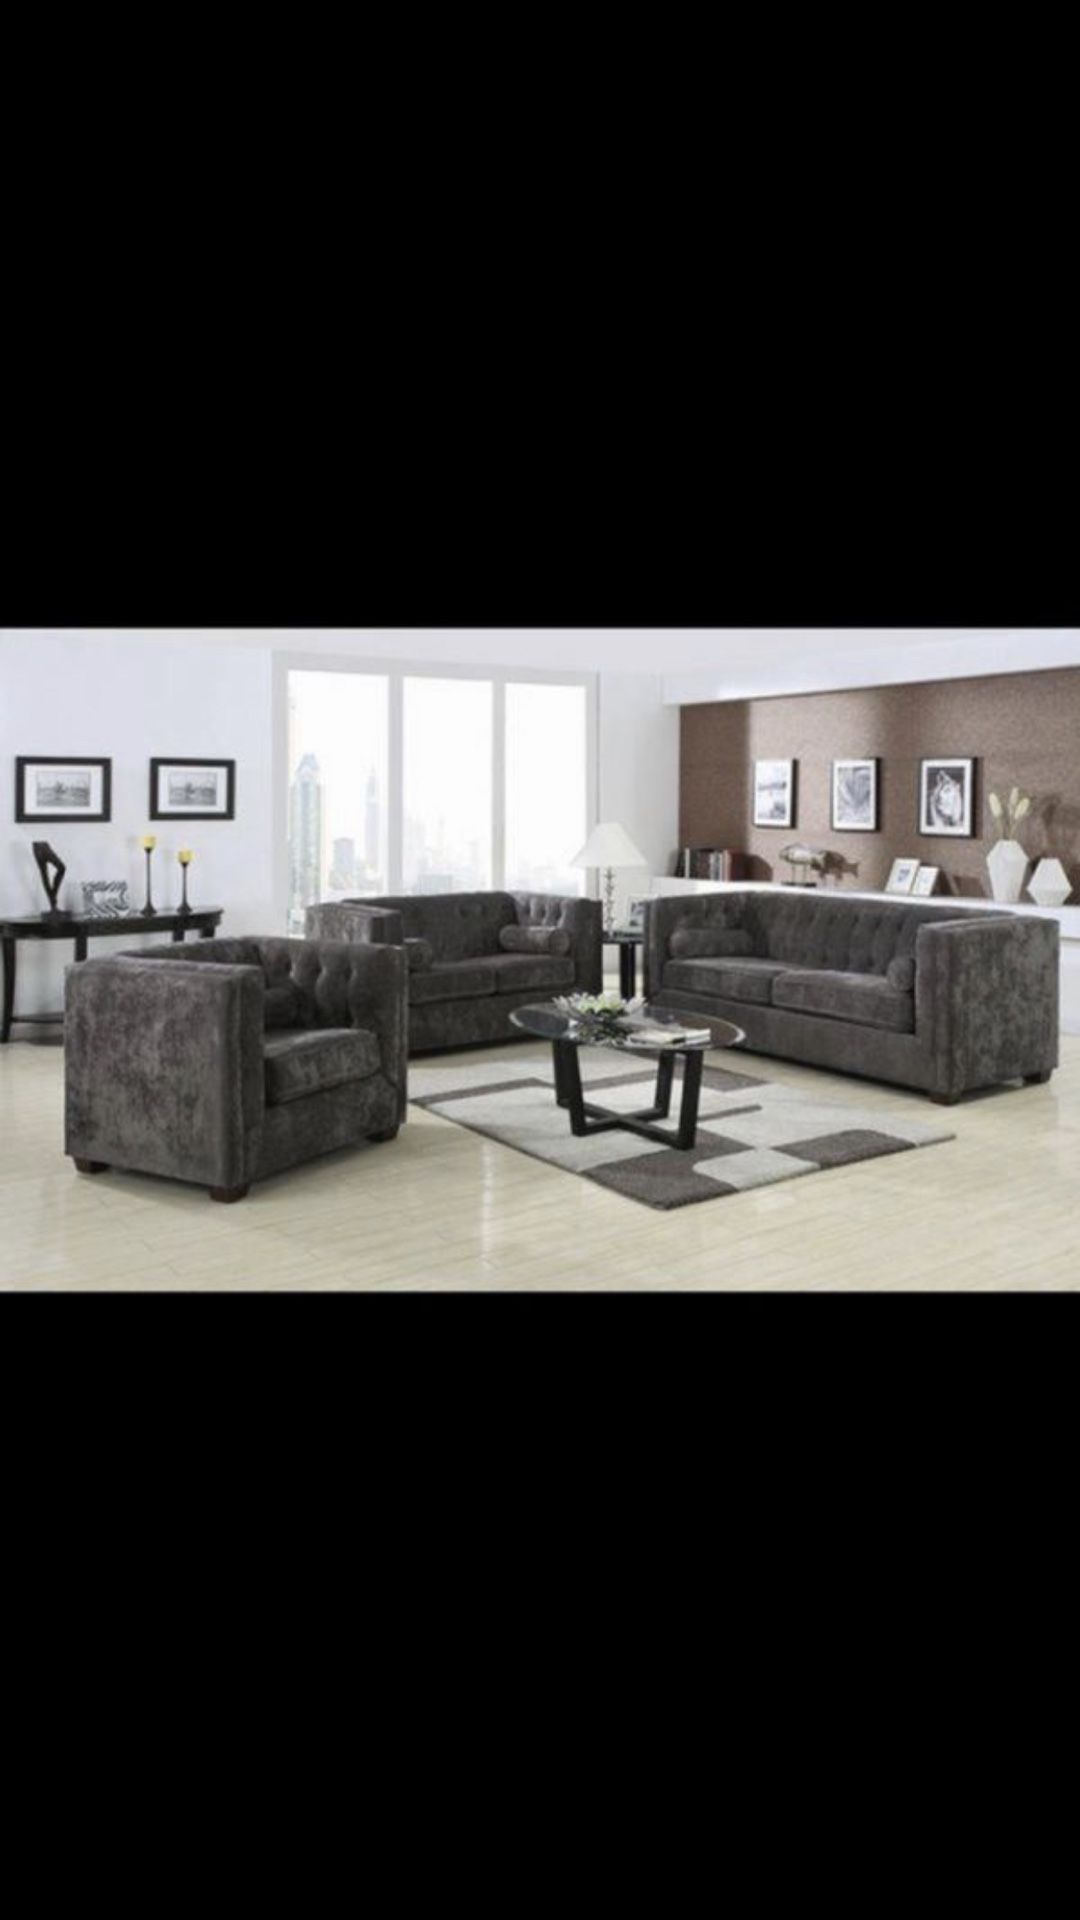 Beautiful new 3 piece sofa set (1 sofa, 1 loveseat, 1 chair) only 1,299$!!!